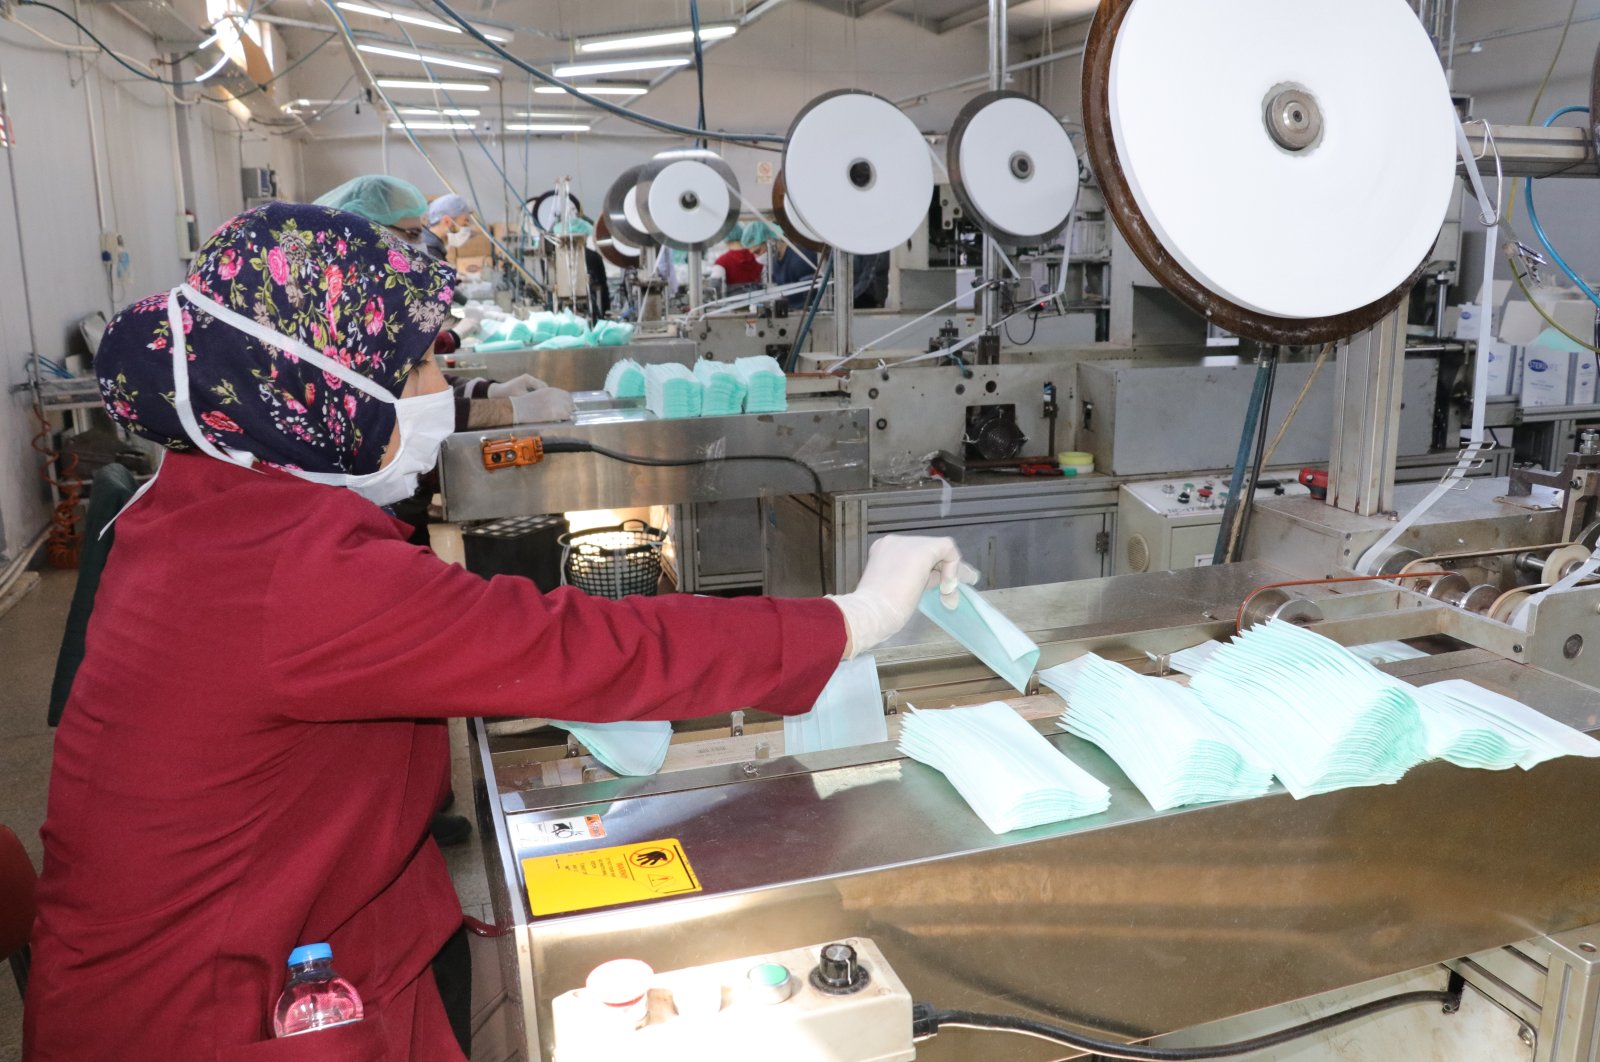 Workers are seen in a firm that manufactures health supplies in Turkey's central province of Yozgat, Wednesday, March 25, 2020. (AA Photo)